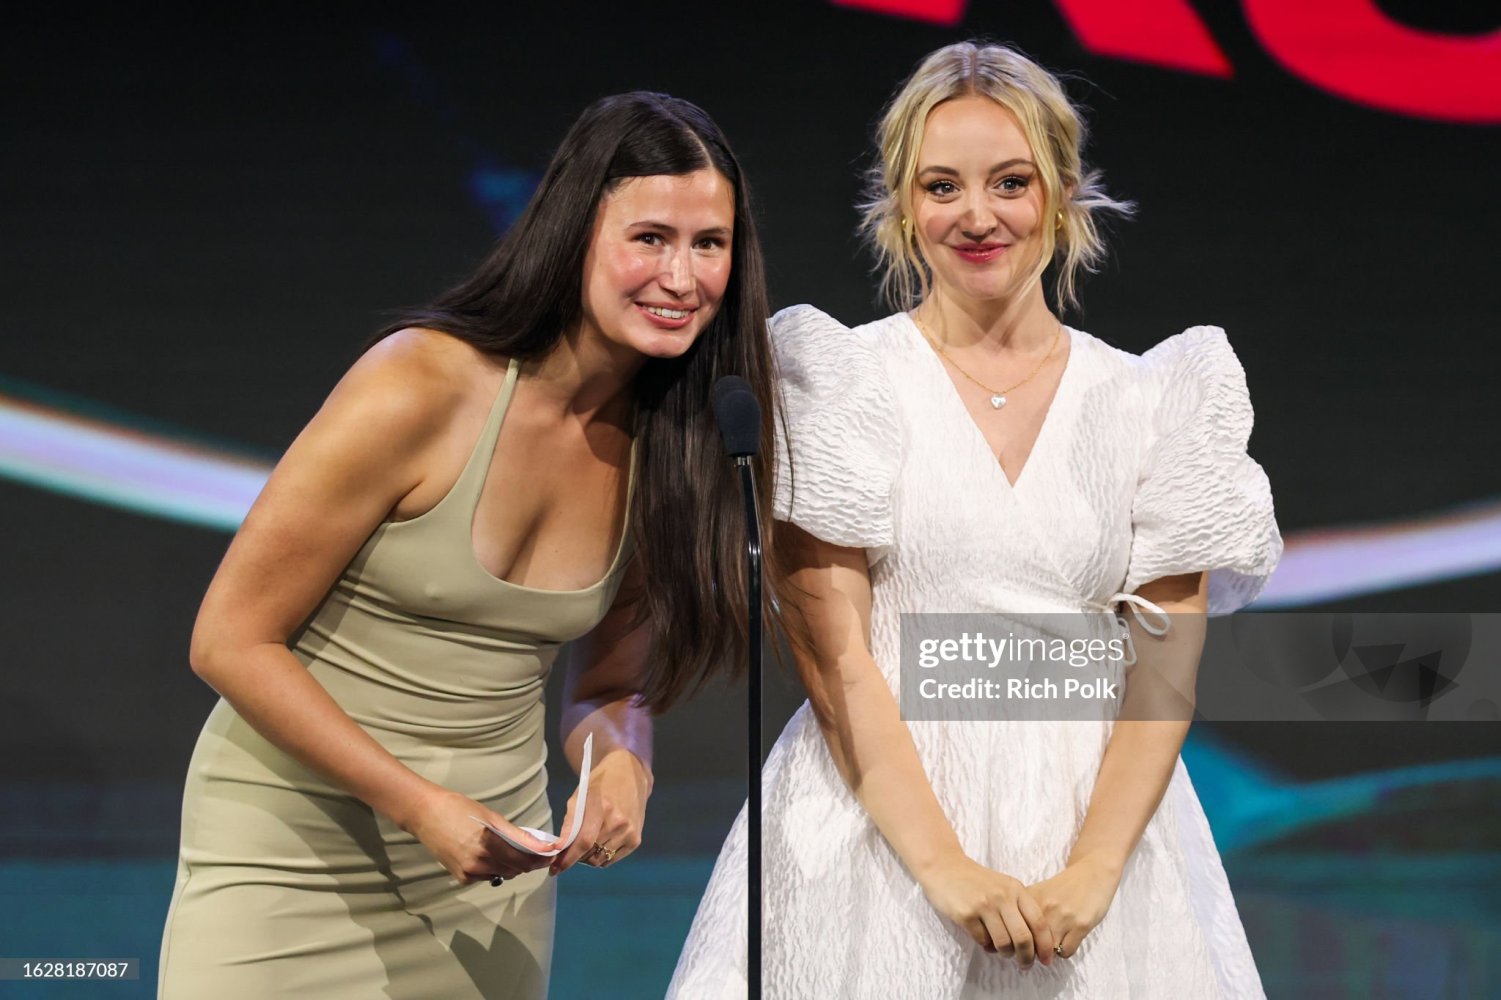 gettyimages-1628187087-2048x2048.jpg